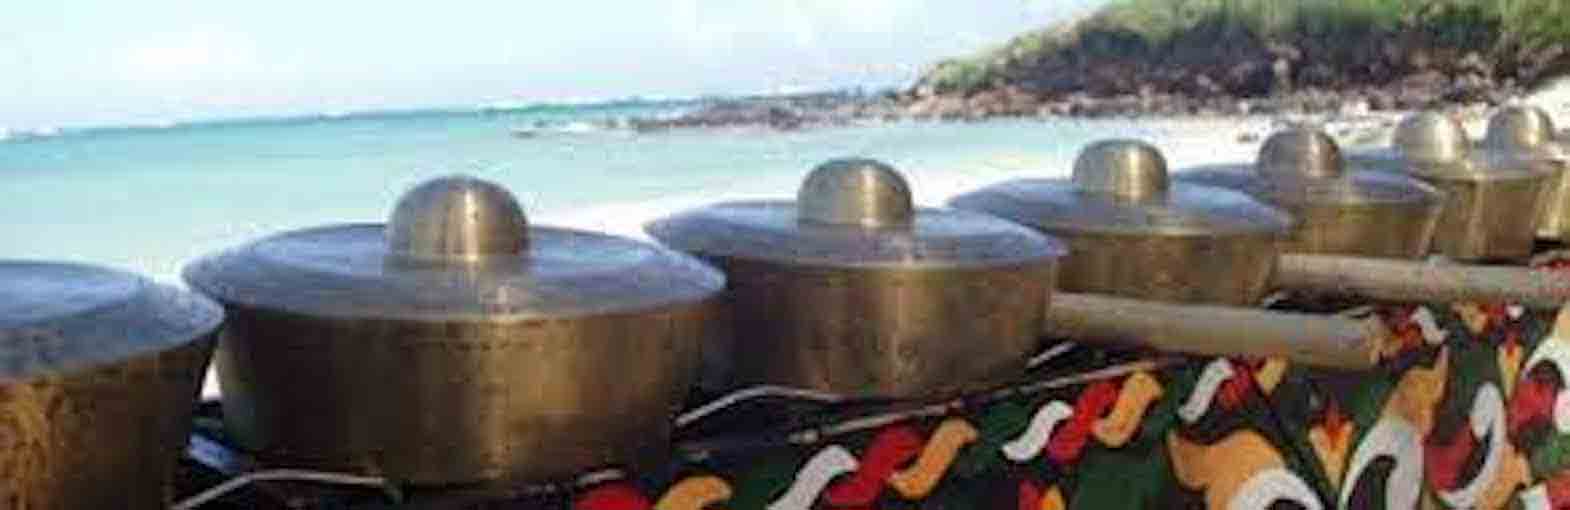 Manilatown Heritage offers ancestral PH gong music workshops Manilatown Heritage offers ancestral PH gong music workshops